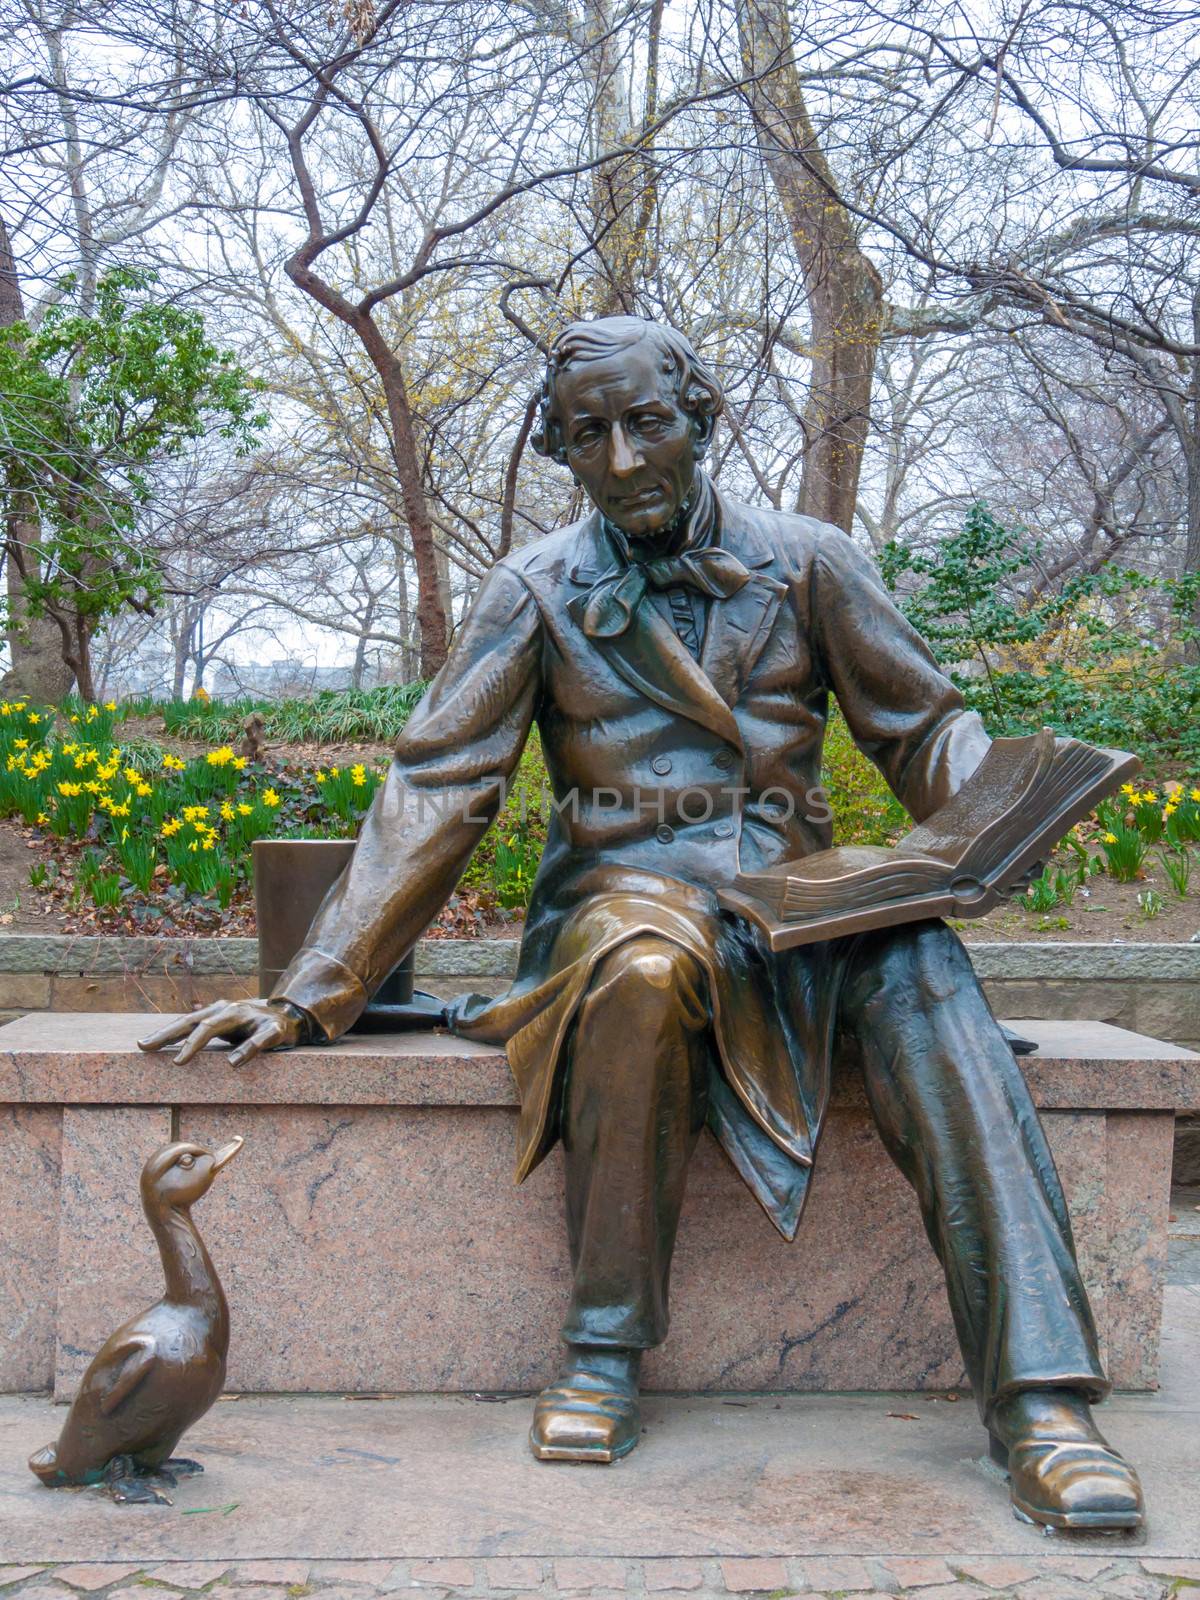 sculpture of Hans Christian Andersen in the Central Park of NYC